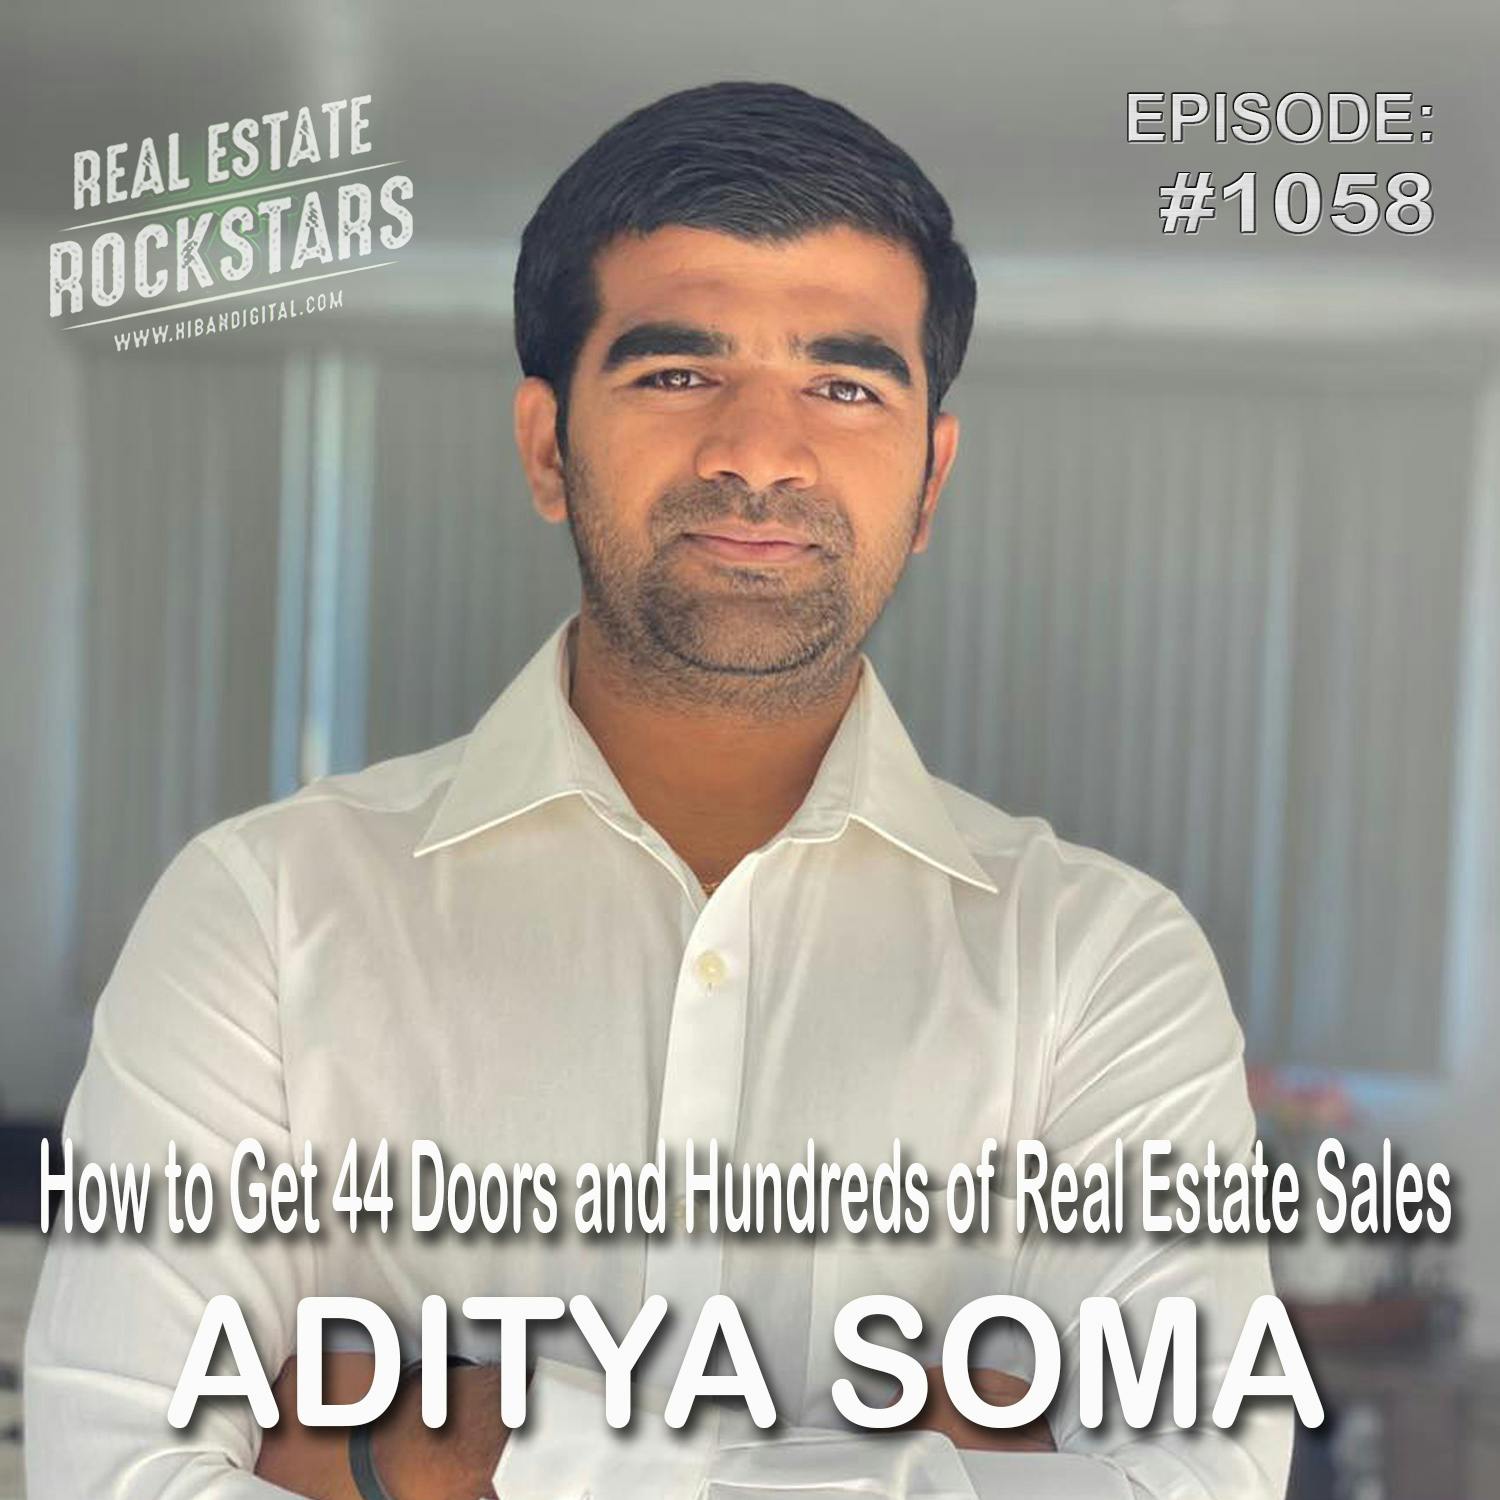 1058: How to Get 44 Doors and Hundreds of Real Estate Sales - Aditya Soma